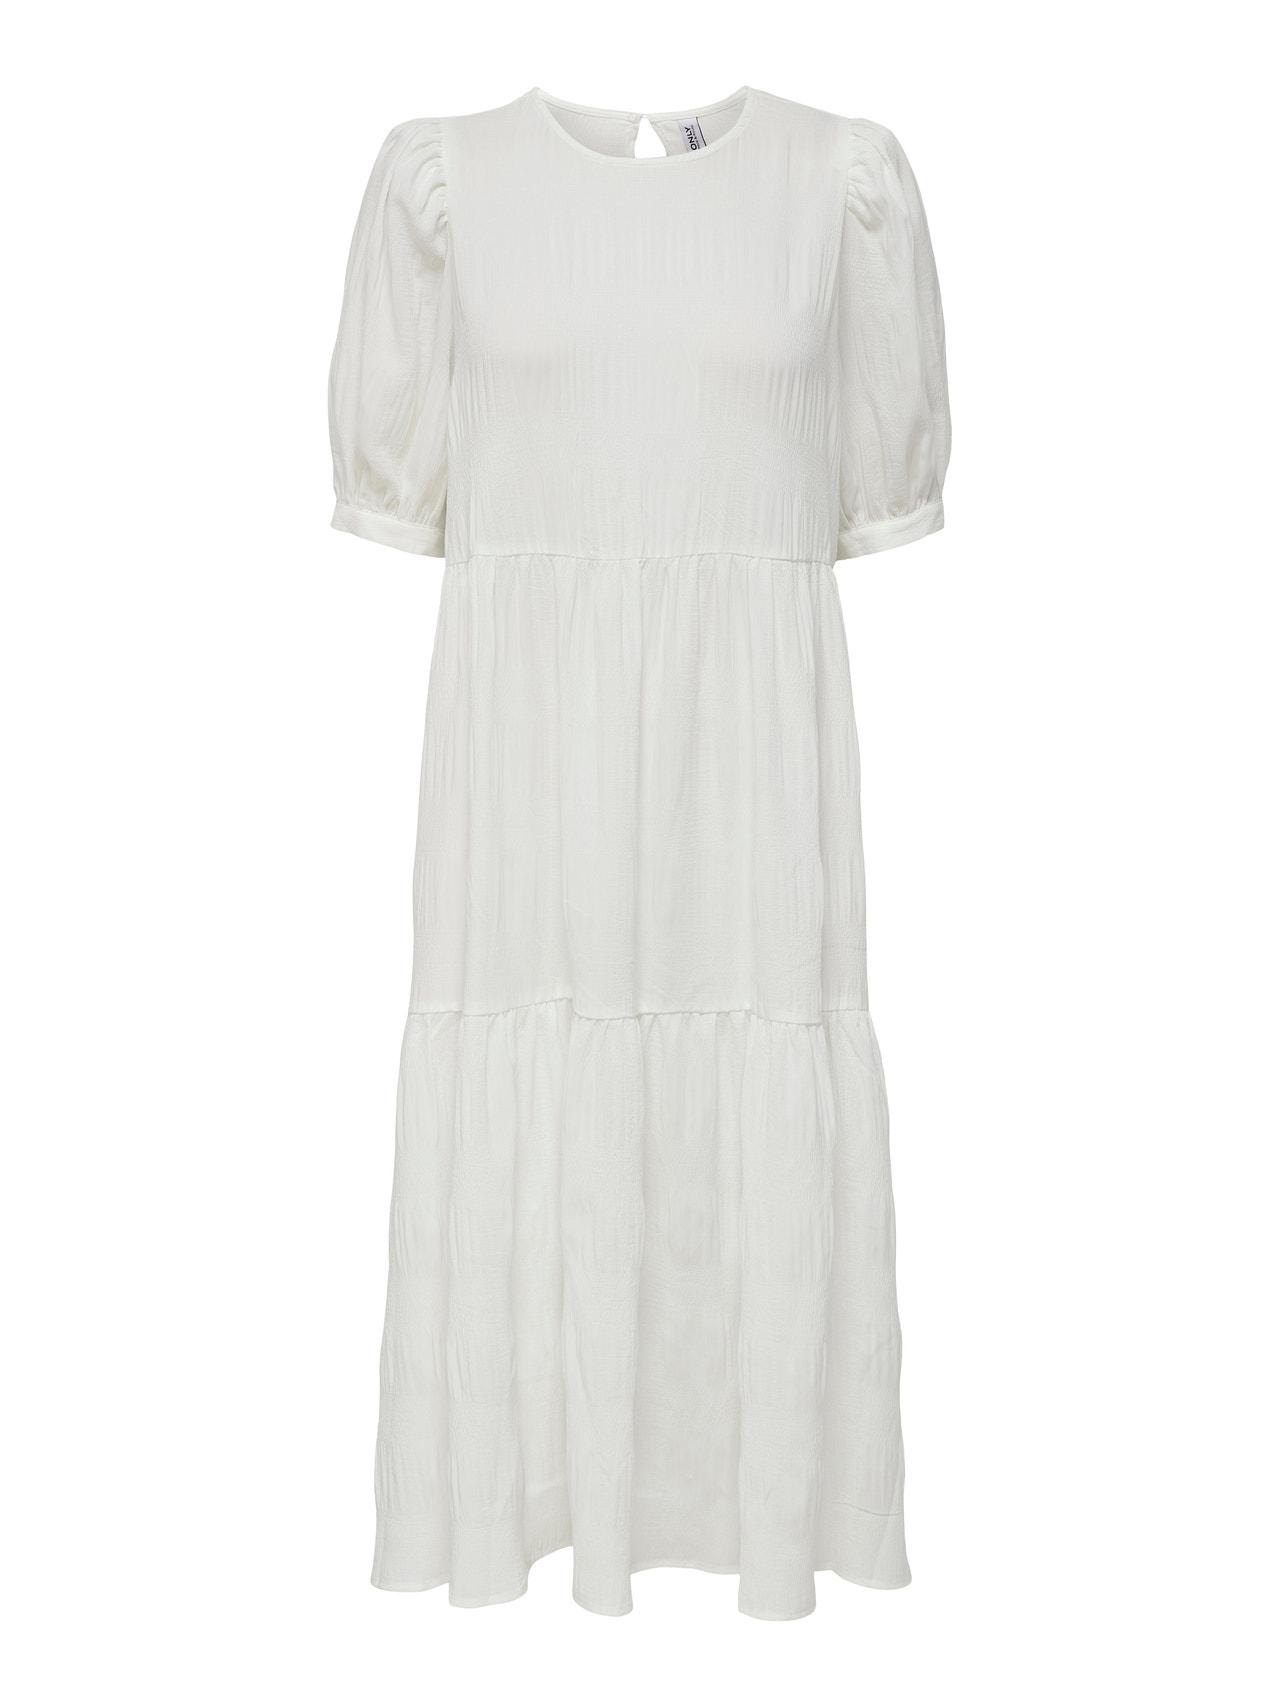 ONLY Robe courte Regular Fit Col carré -White - 15261504